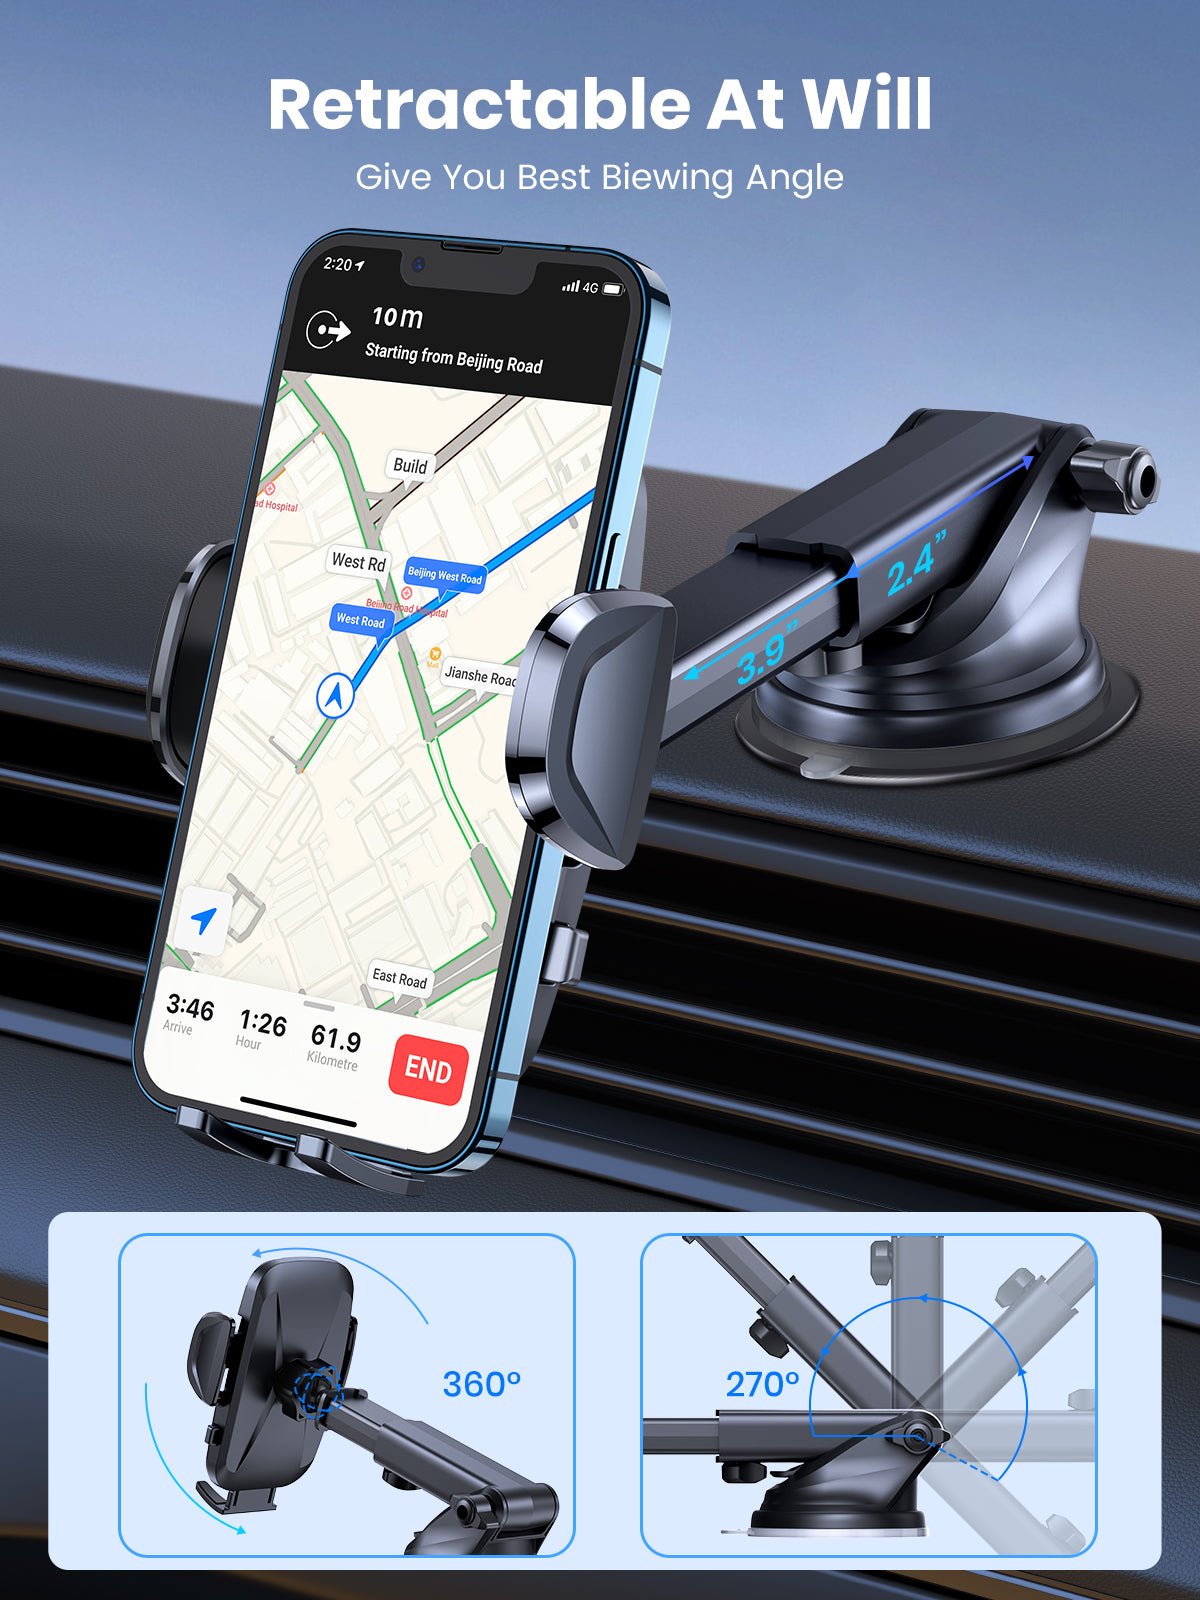 TOPK D36 Phone Holder for Car Dashboard and Air Vent - TOPK Official Store